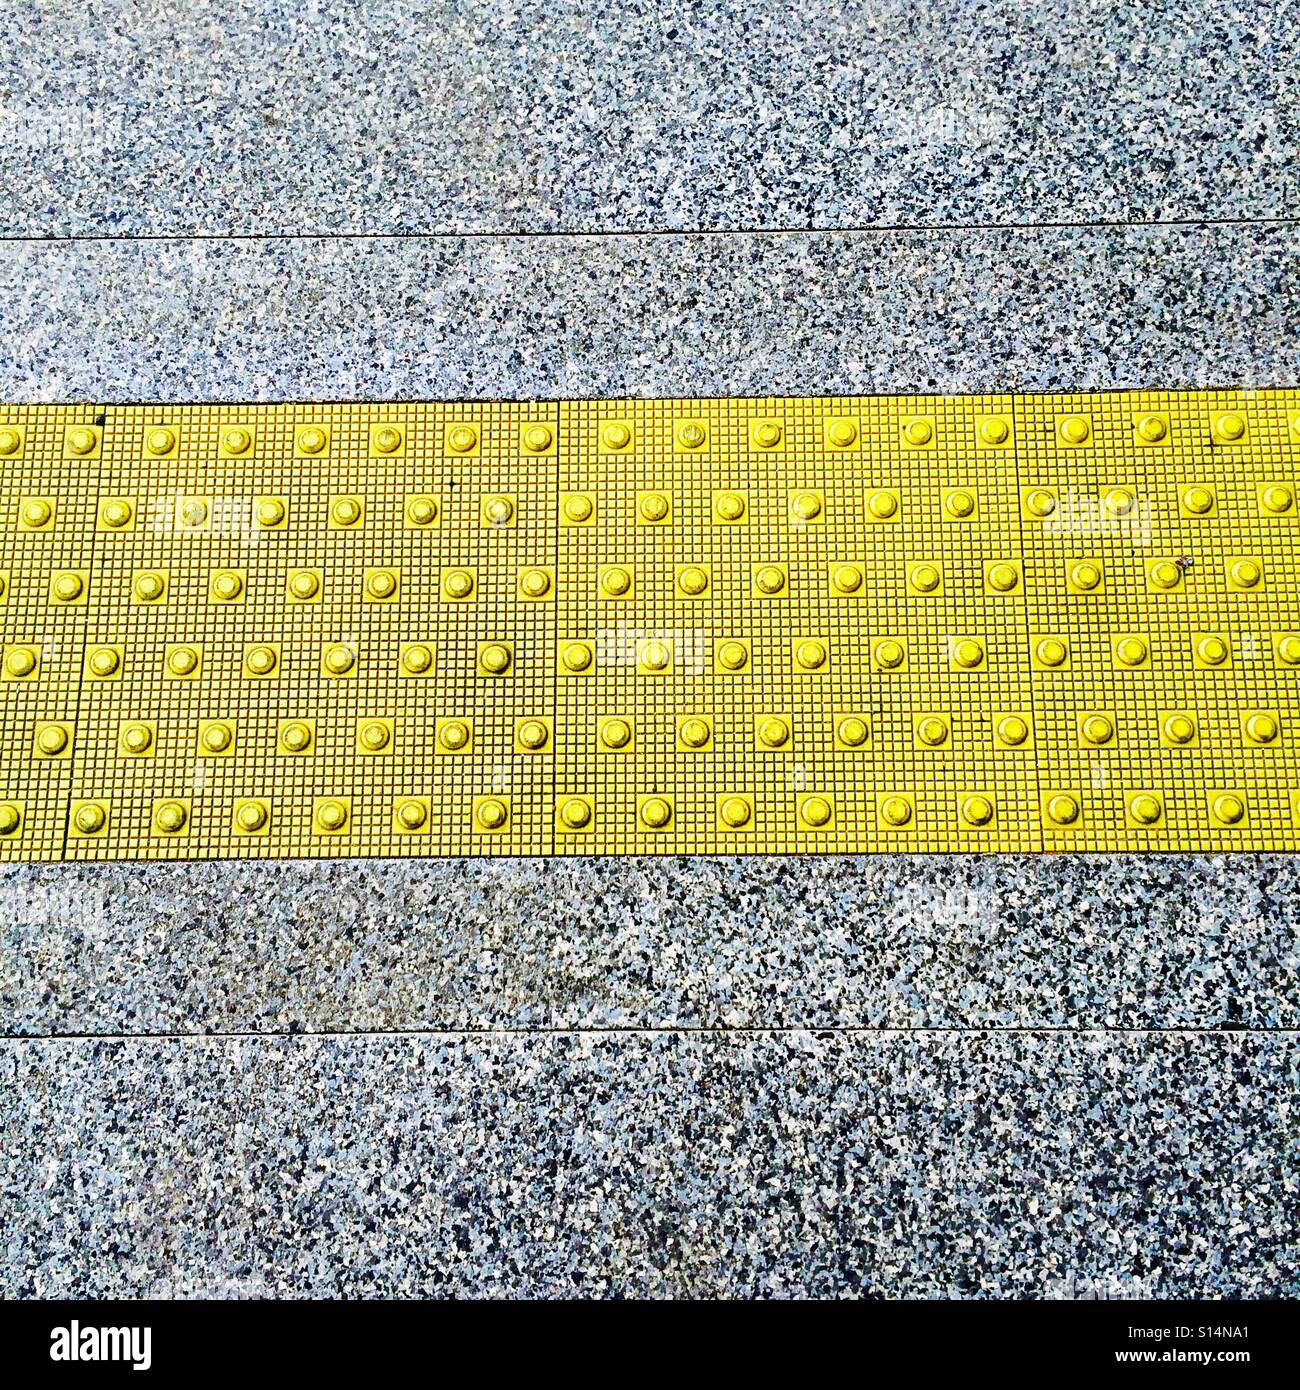 Tactile paving markings to warn the visibly impaired Stock Photo